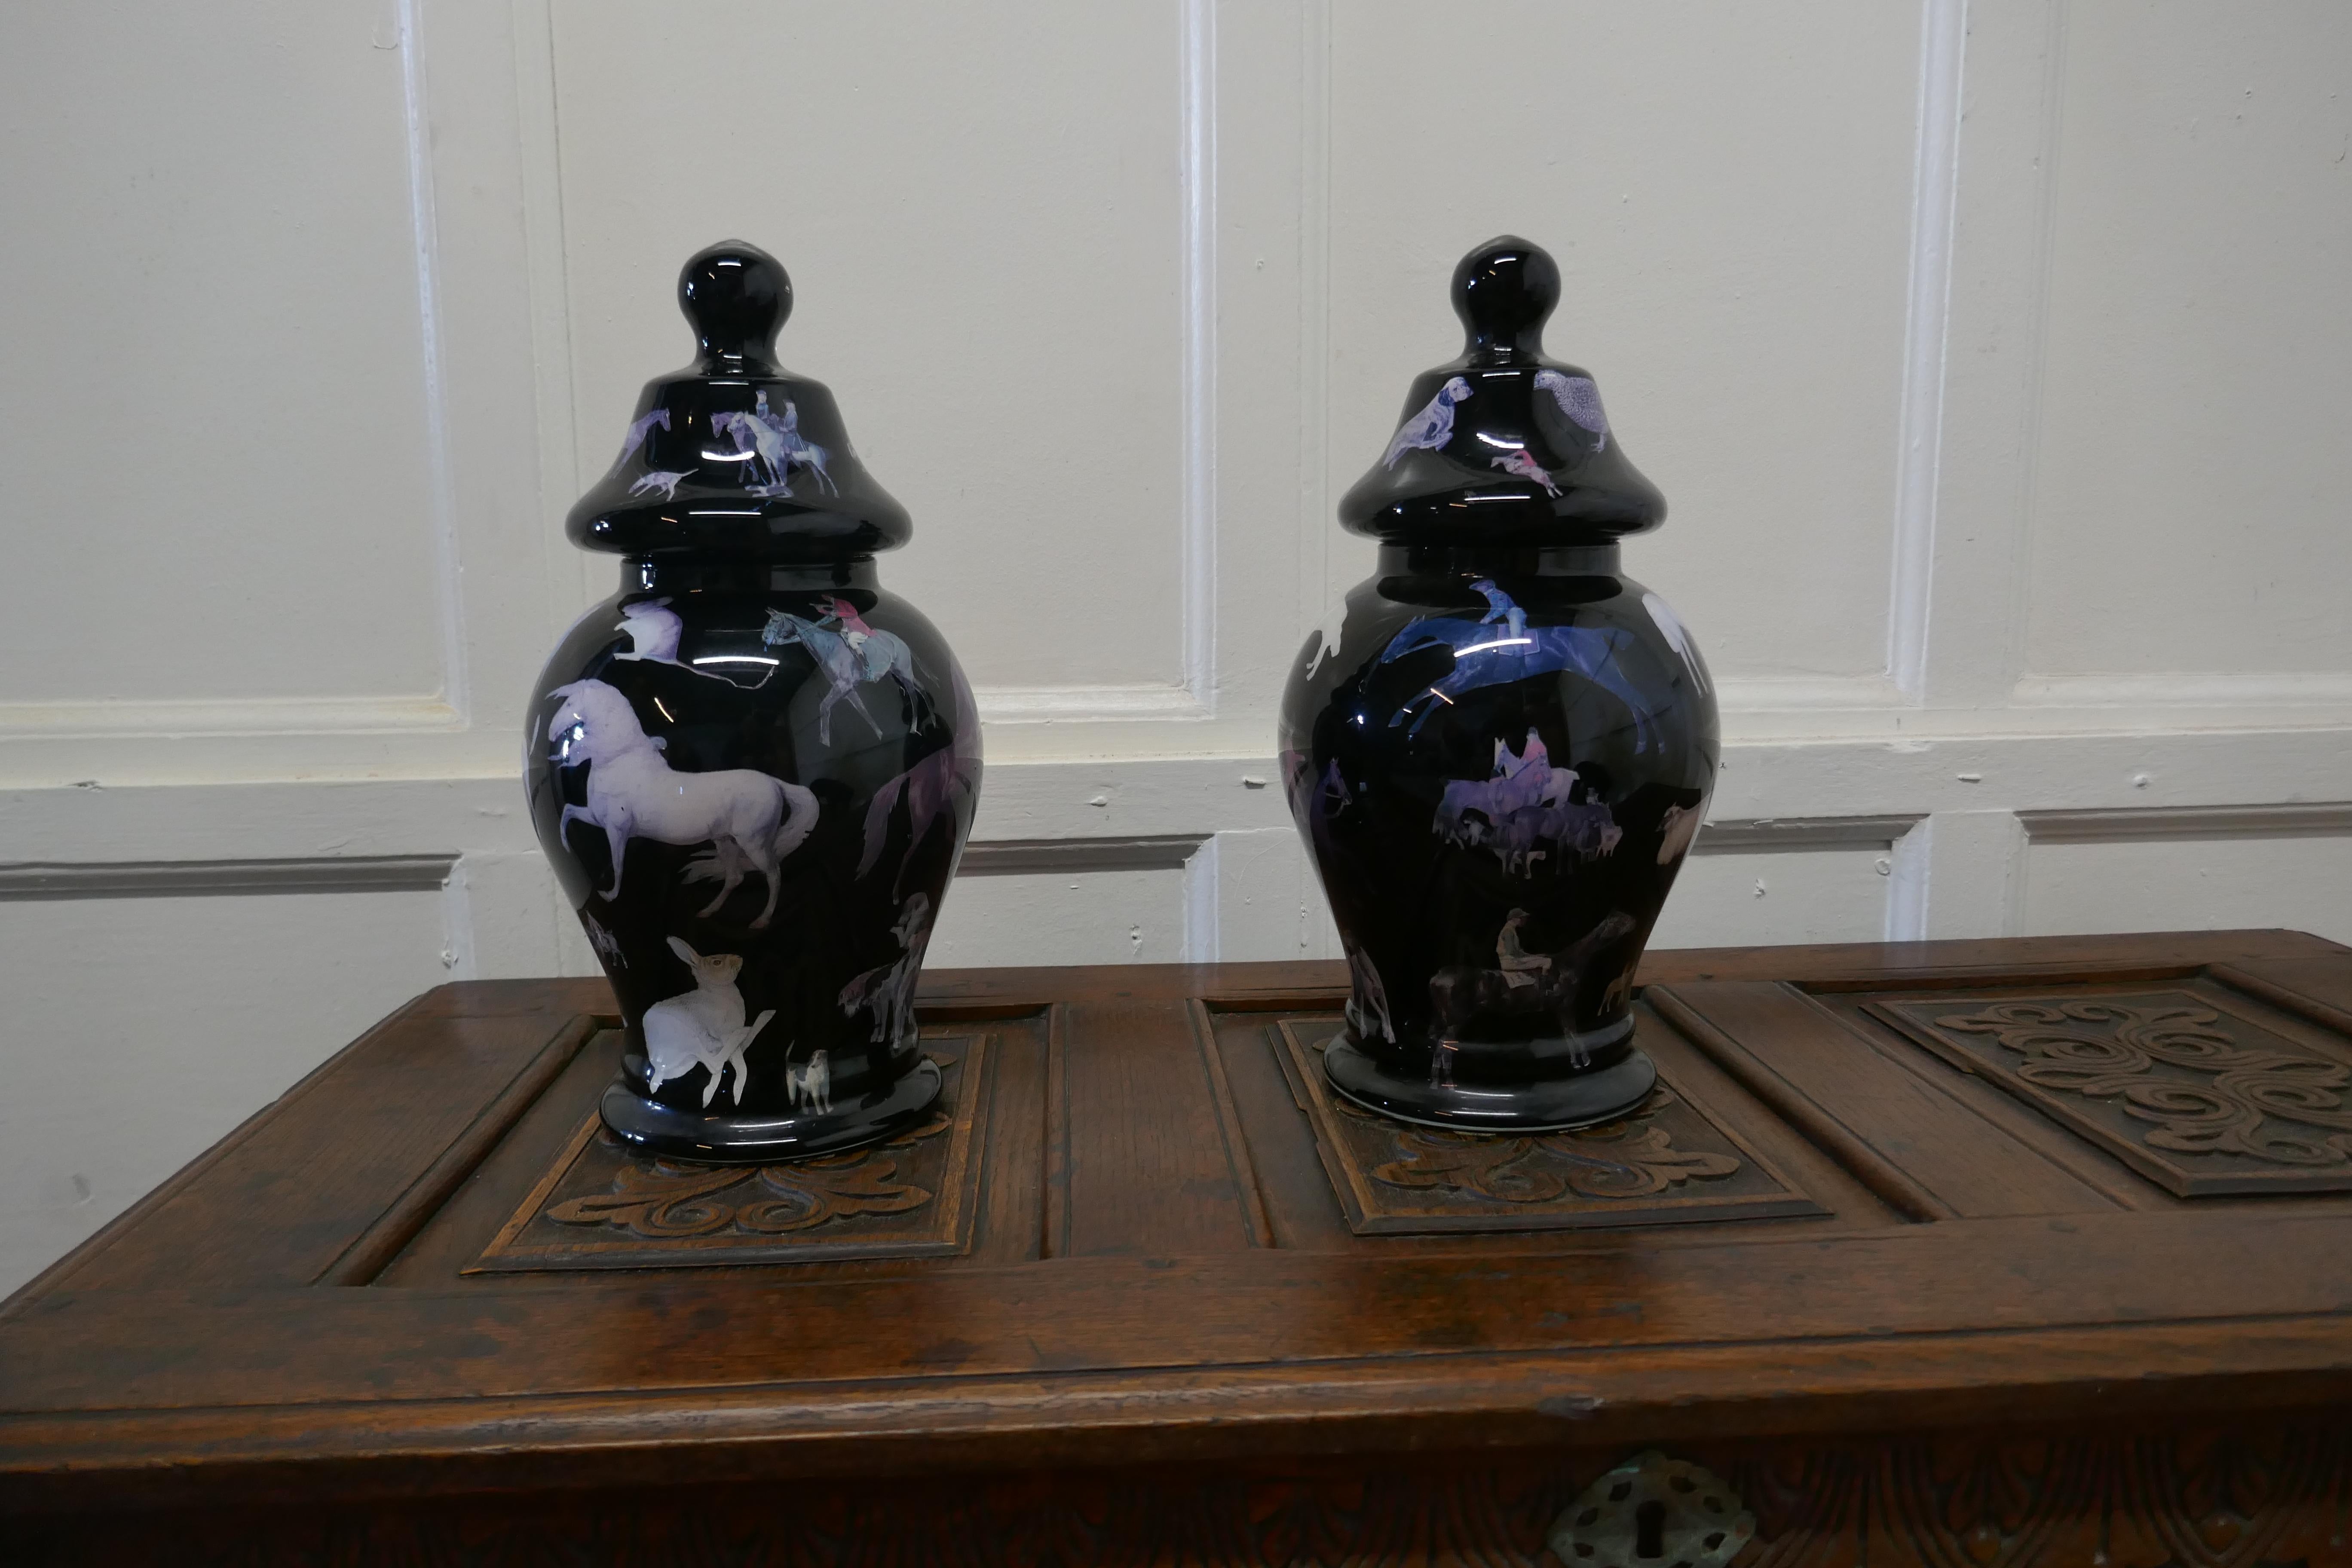 A pair of reverse painted Decoupage Baluster vases with covers

These black vases are decorated in a traditional way known as decalcomania, this involves positioning small pictures inside facing outward on the glass
These vases are in the themed